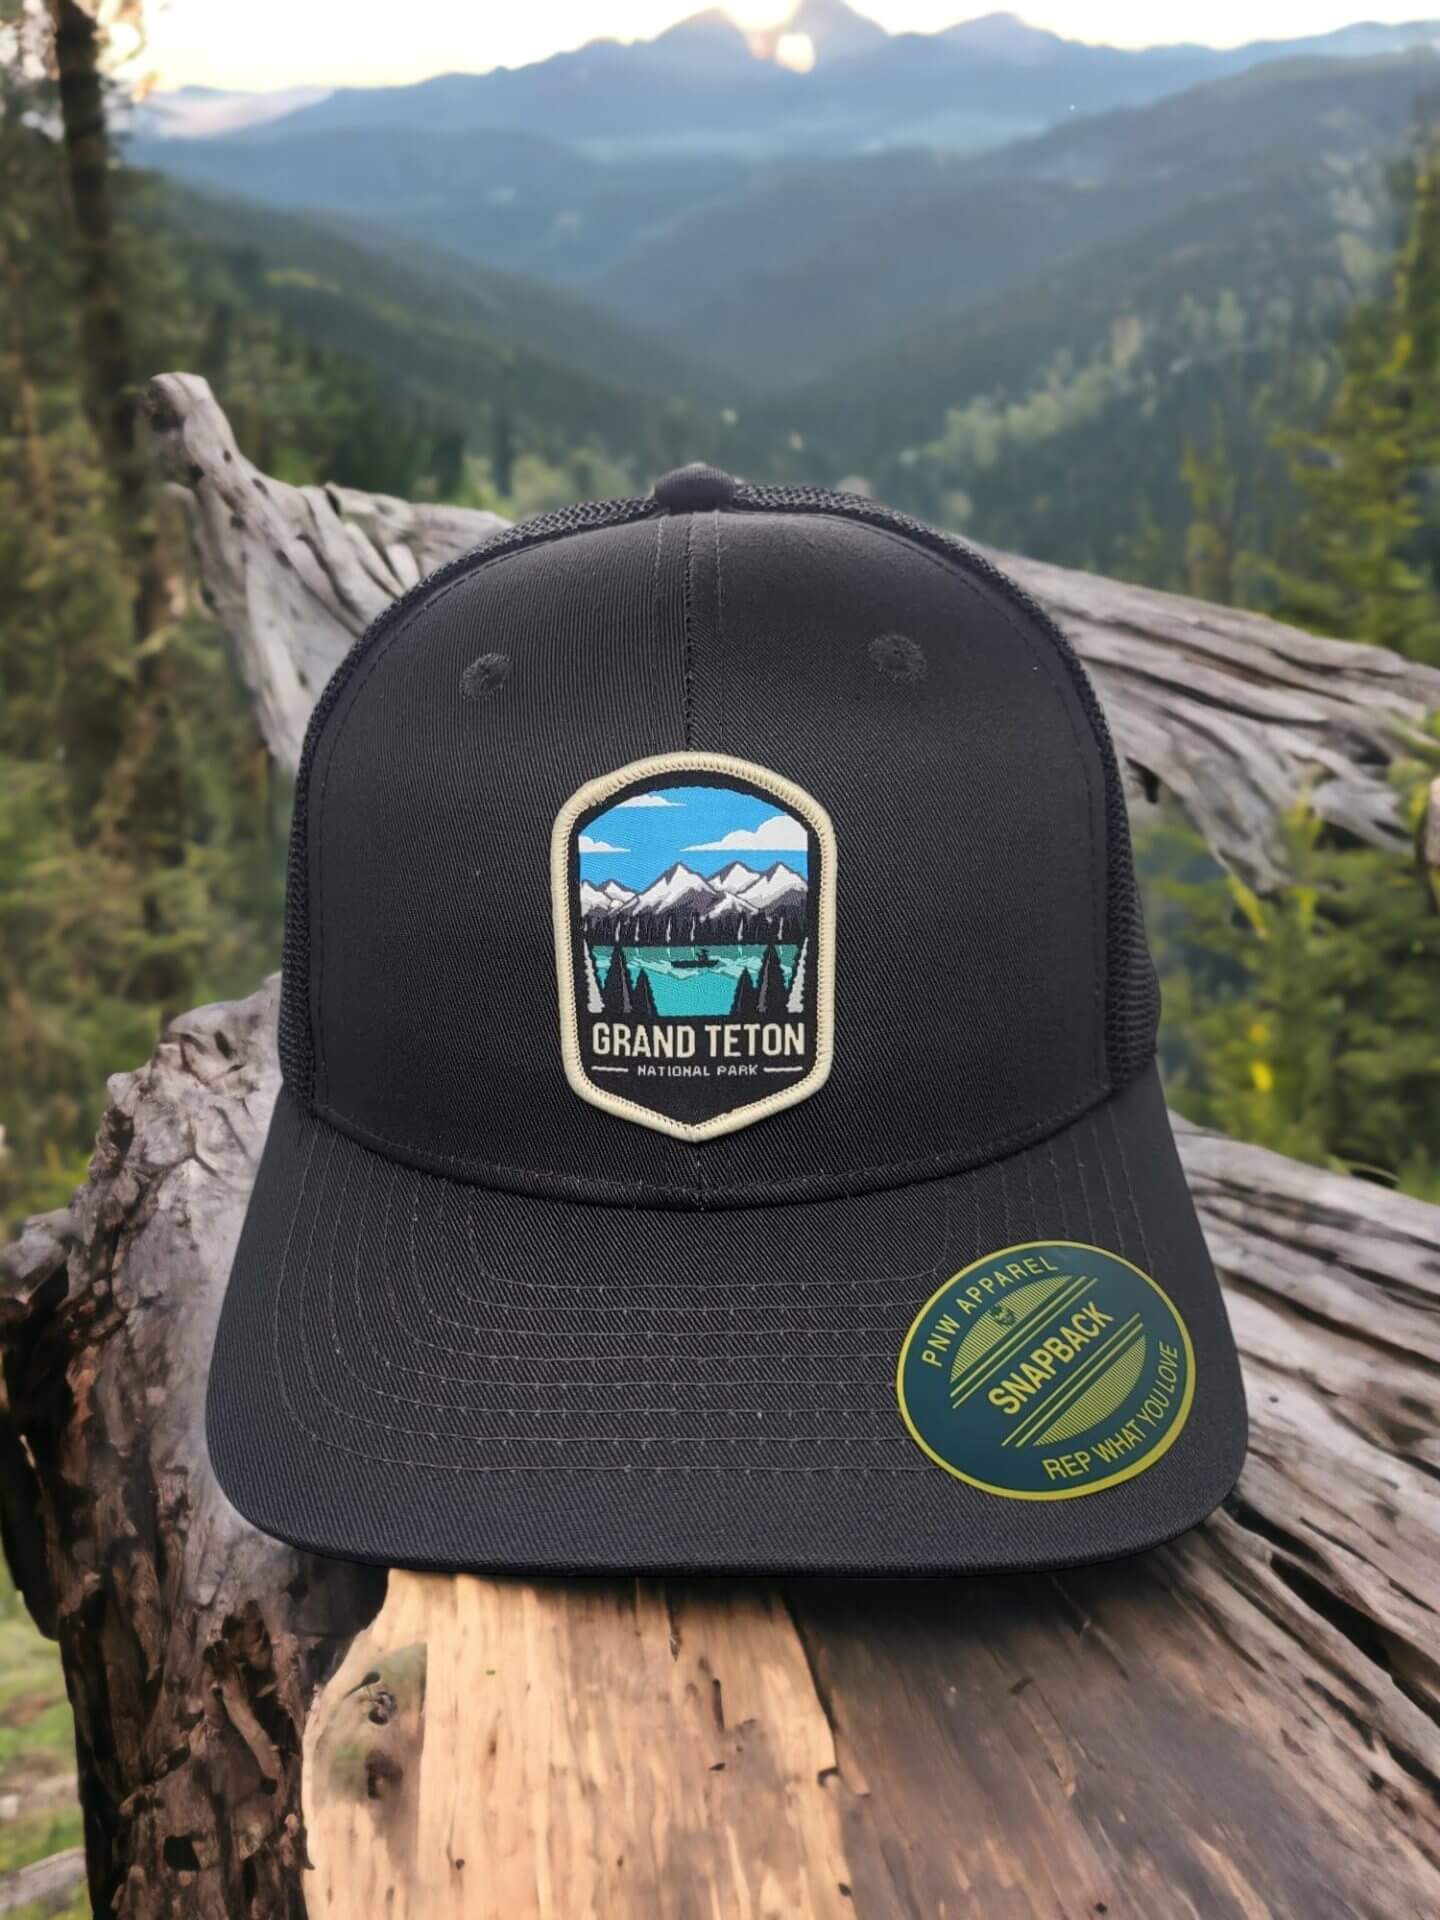 Tents and Trees Trucker Hat Black Lantern Hat Mesh Trucker Hat Gift for Men  Nature Hat Trucker Hats for the Outdoors -  Canada